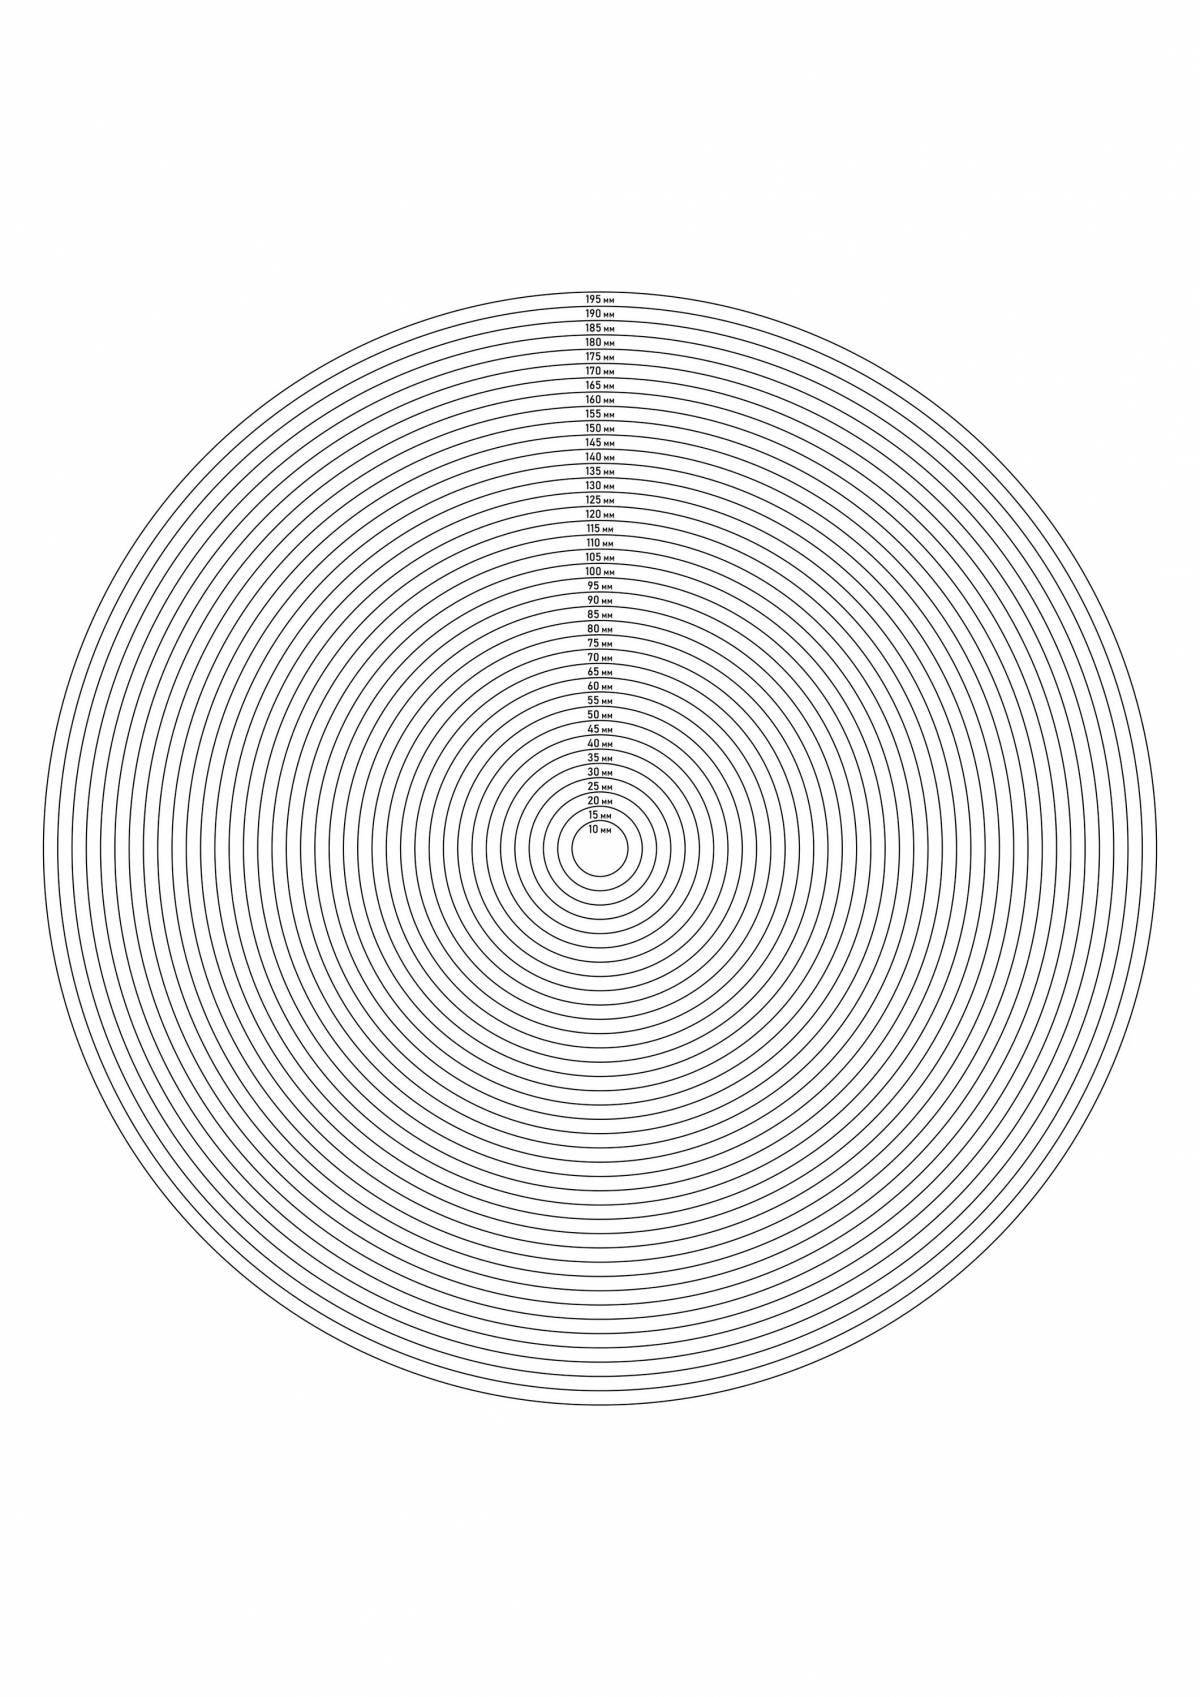 Coloring bright circle with lines